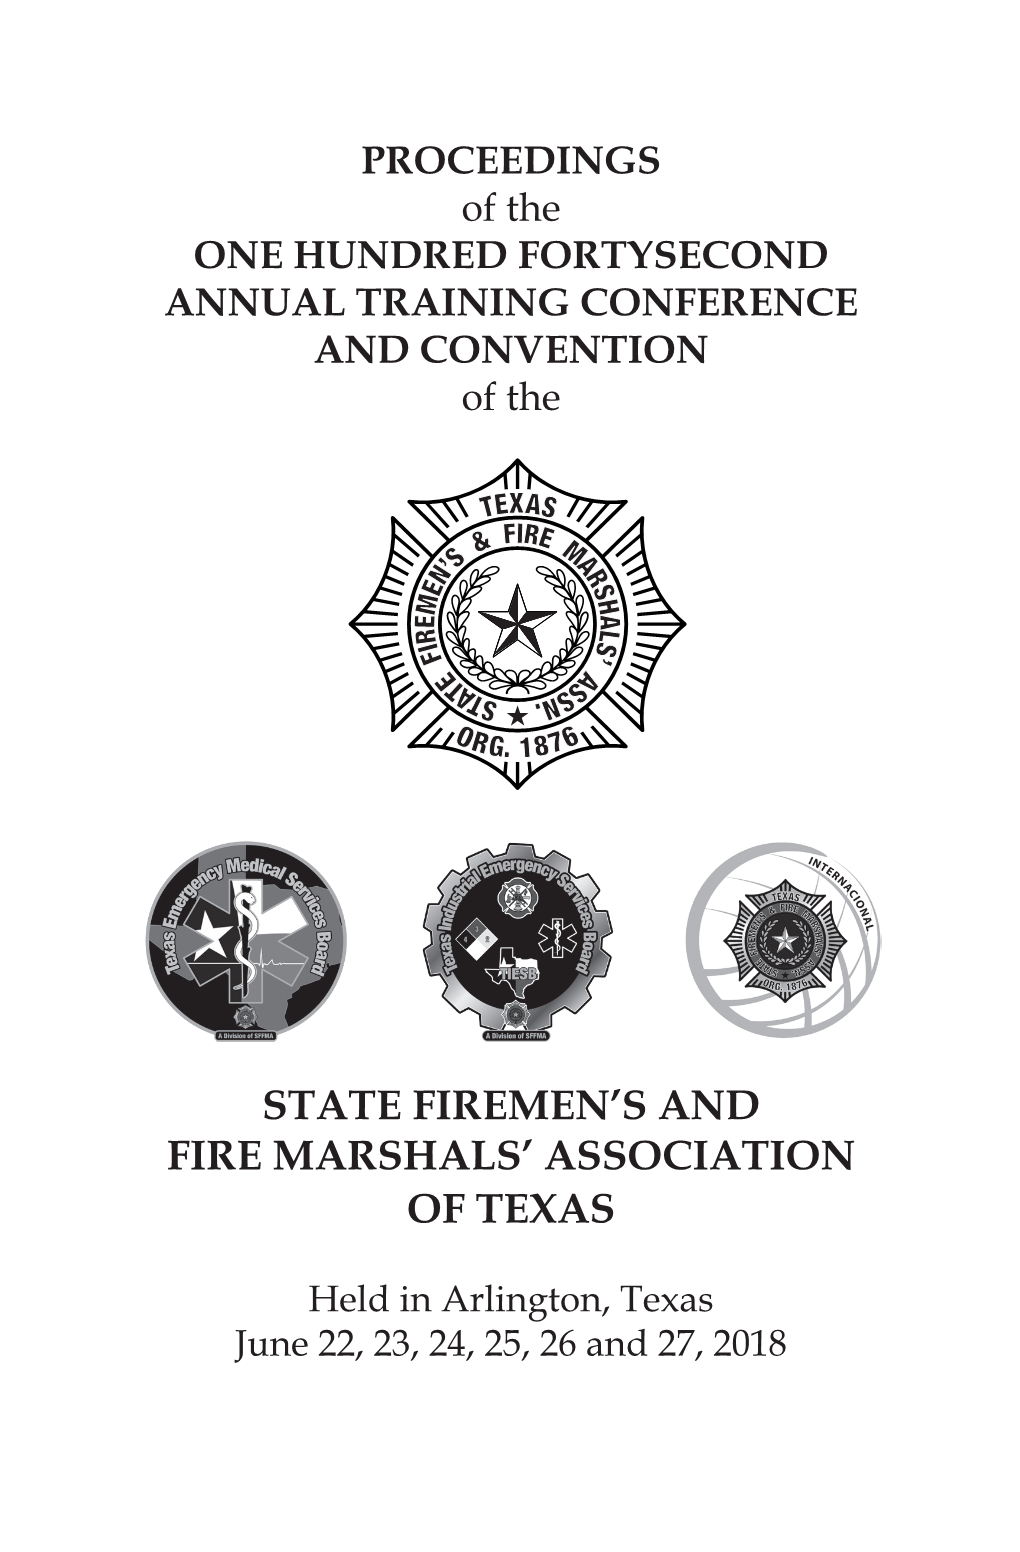 State Firemen's and Fire Marshals' Association of Texas